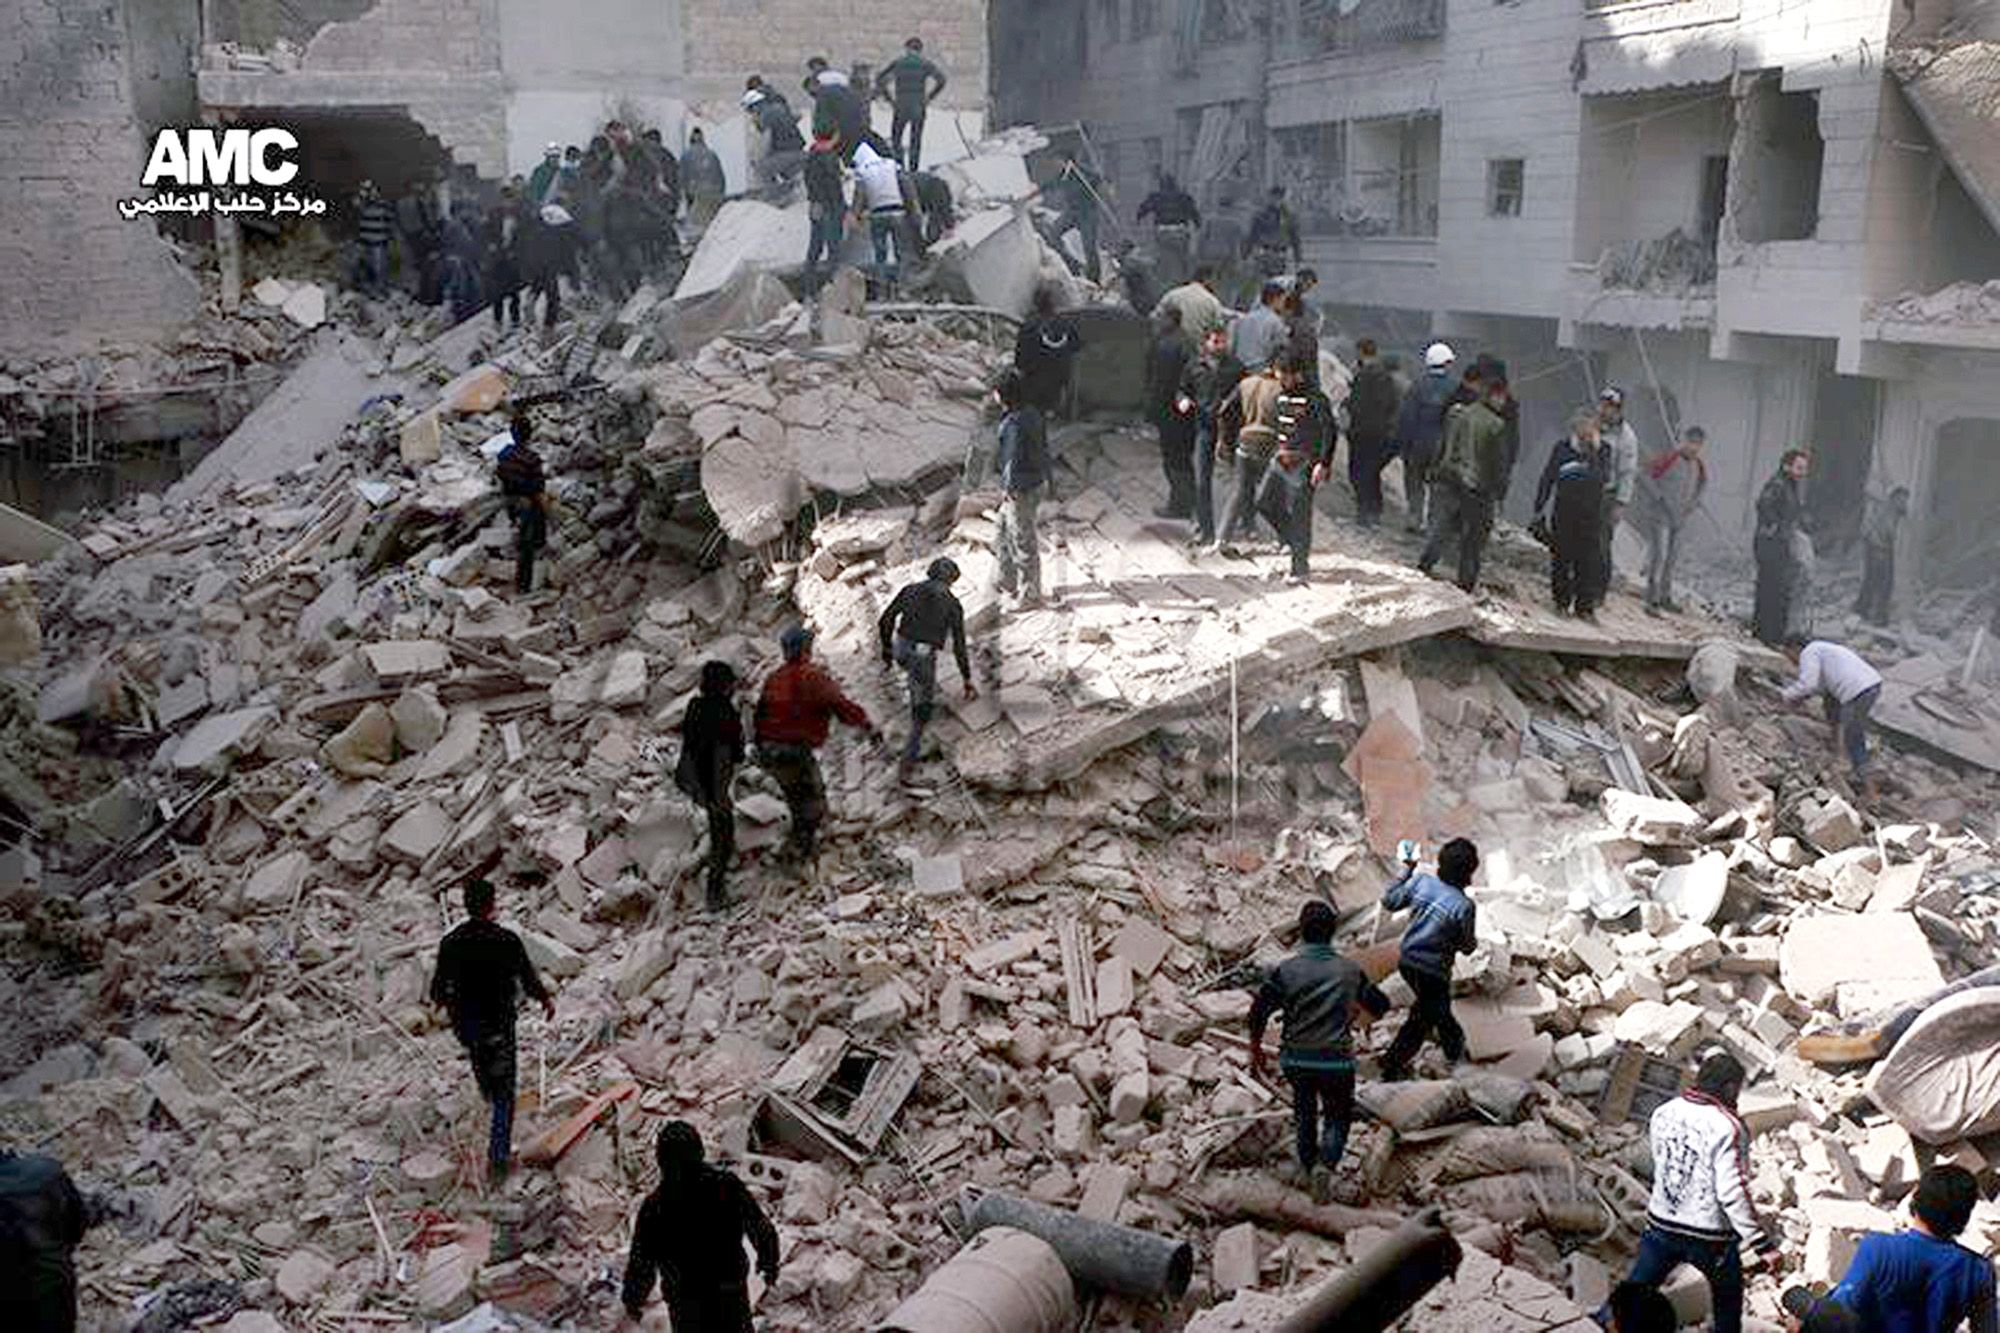 This photo taken Wednesday and provided by the anti-government activist group Aleppo Media Center shows people inspecting the rubble of destroyed buildings following a Syrian government airstrike in Aleppo, Syria.